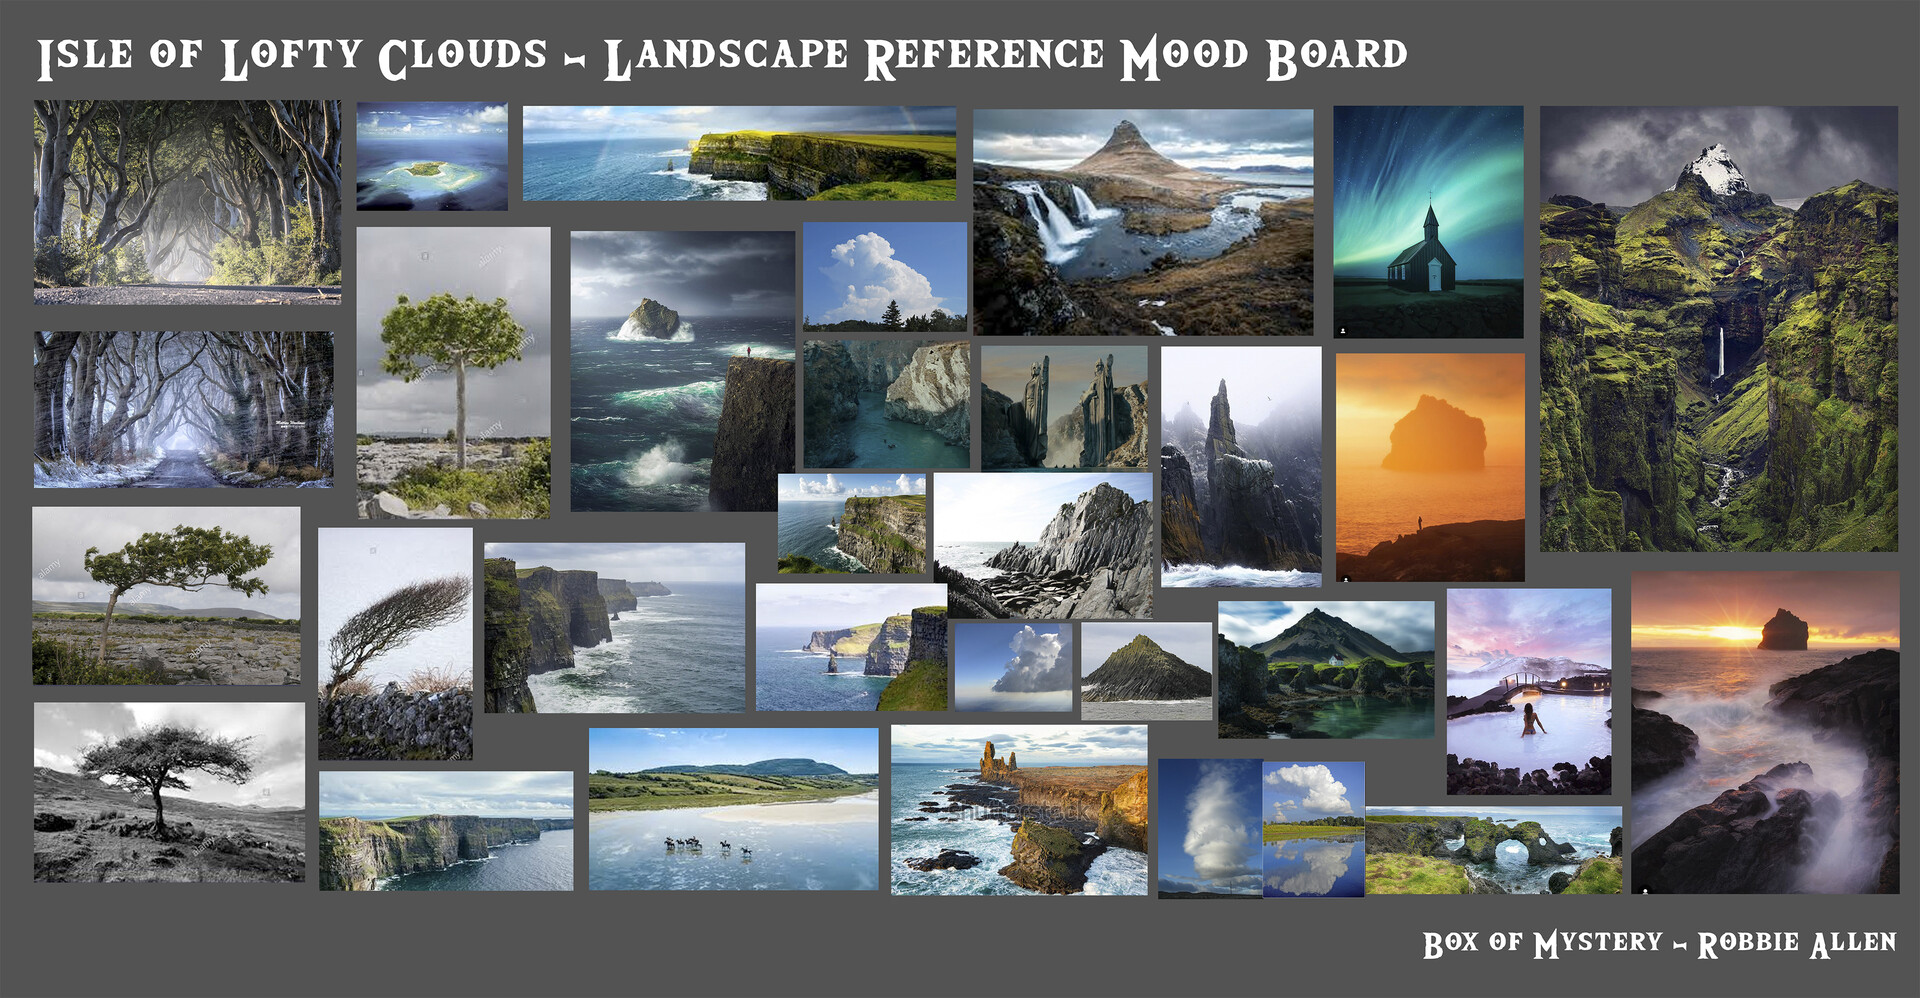 Isle_of_Lofty_Clouds_3_-_Reference_Mood_Board_SMALL.jpg